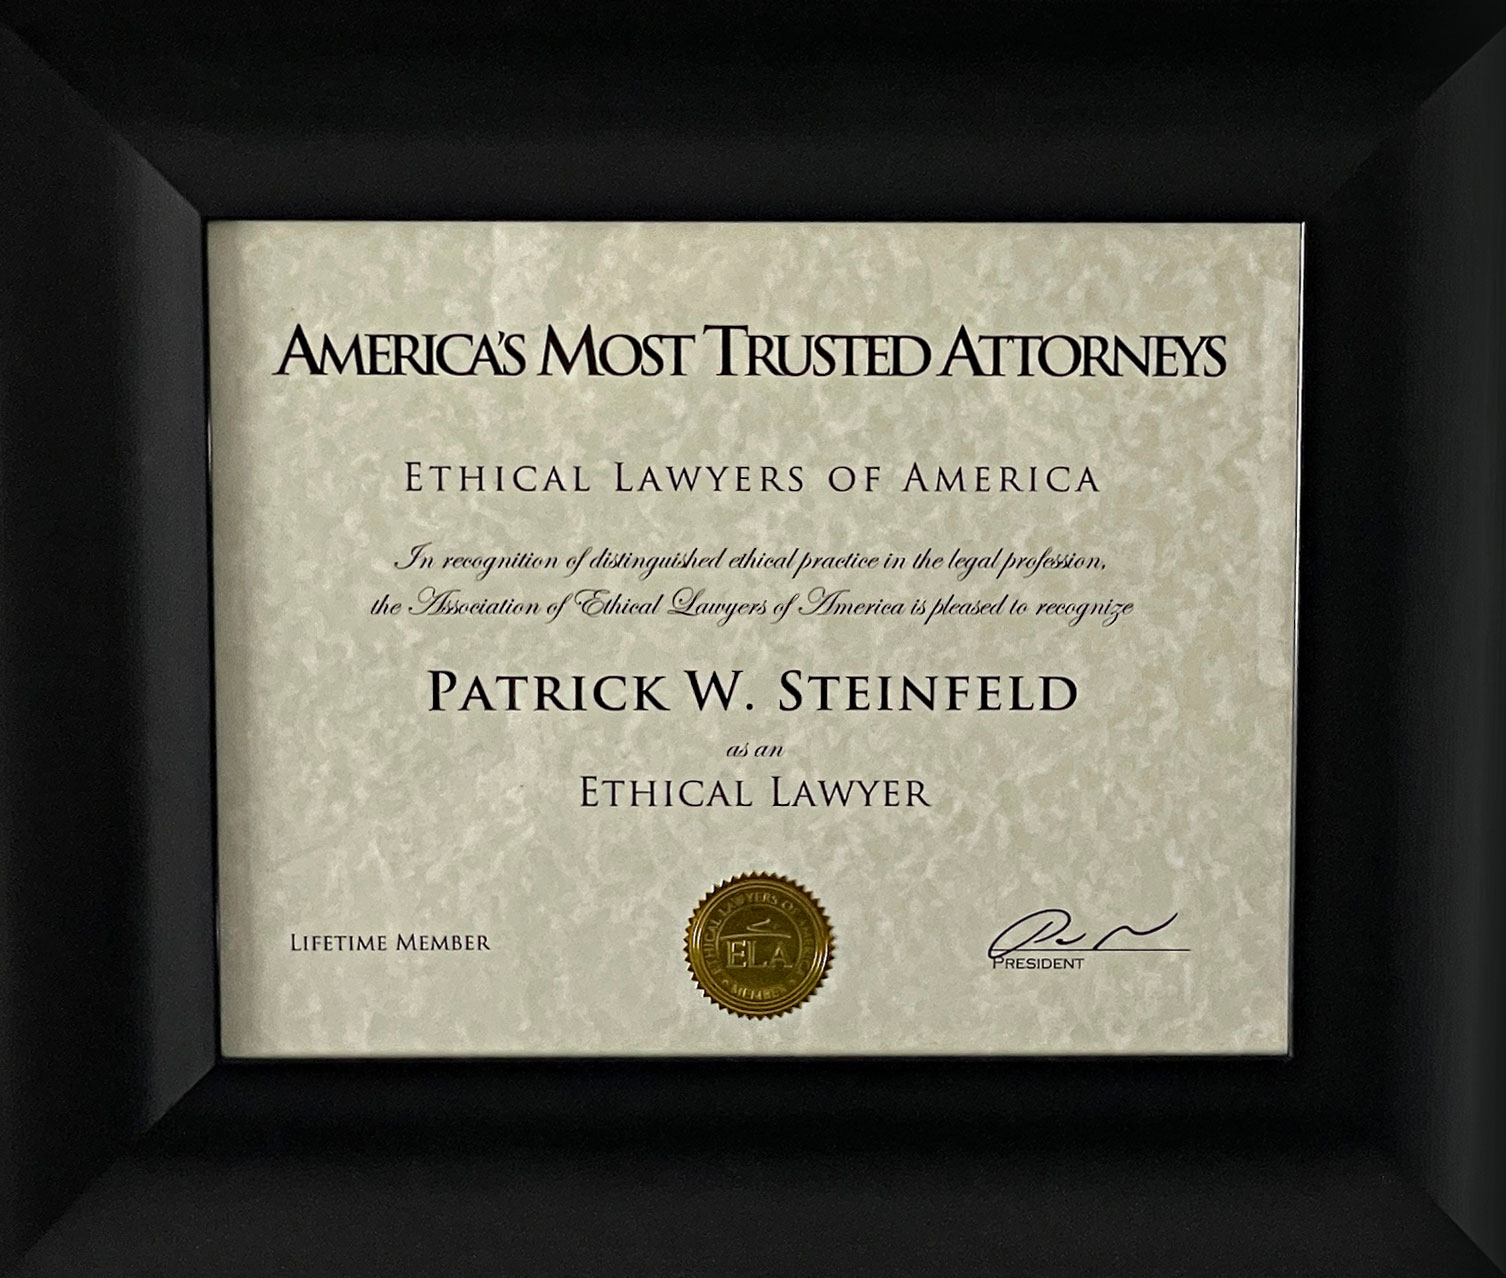 Ethical lawyers of america patrick steinfeld 2